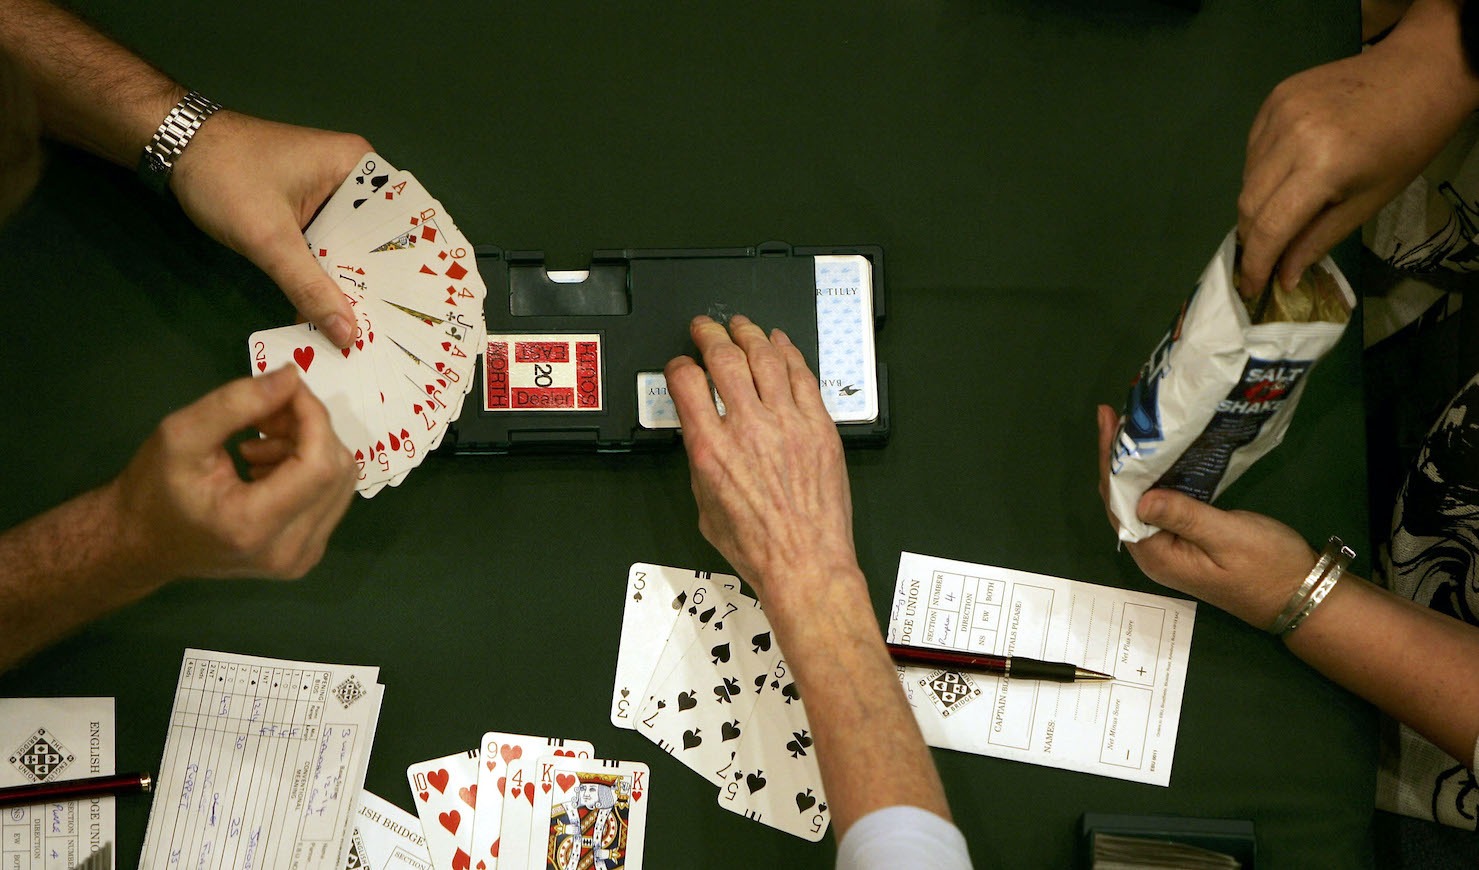 People play in an open round of Europe's biggest single venue bridge competition at the Metropole Hotel August 19, 2005 in Brighton, England. The game of Bridge is believed to share the same mental ability that is used to trade shares and is played regularly by over a million people. (Photo by Bruno Vincent/Getty Images)